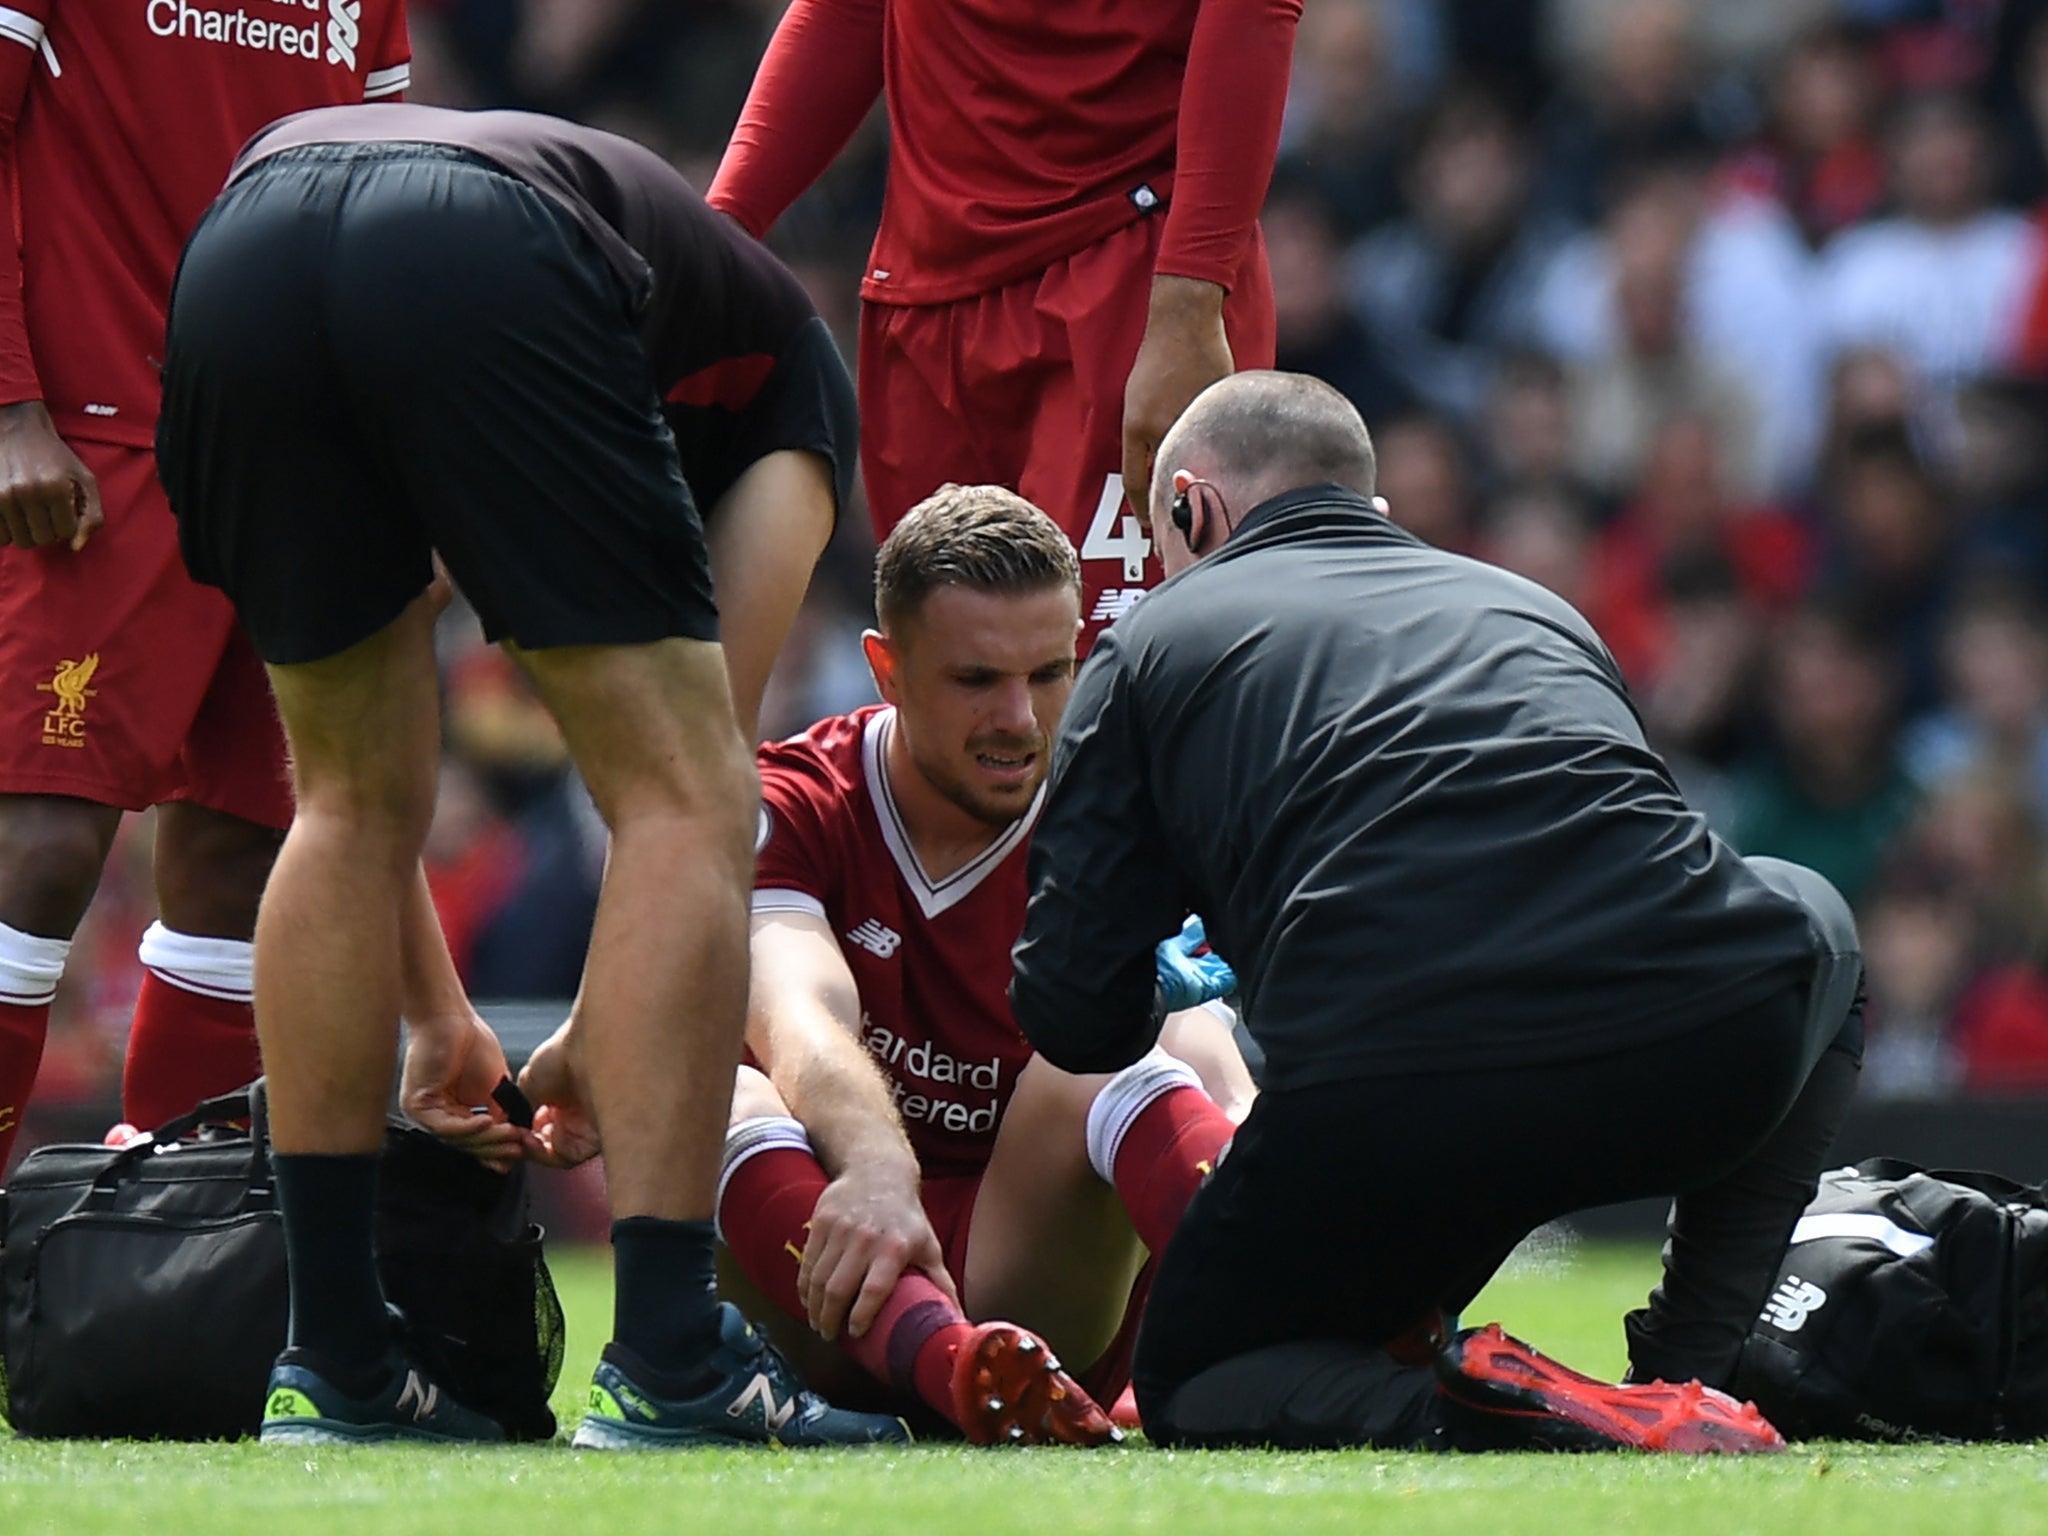 Henderson was one of those on the end of what Jurgen Klopp felt was rough treatment